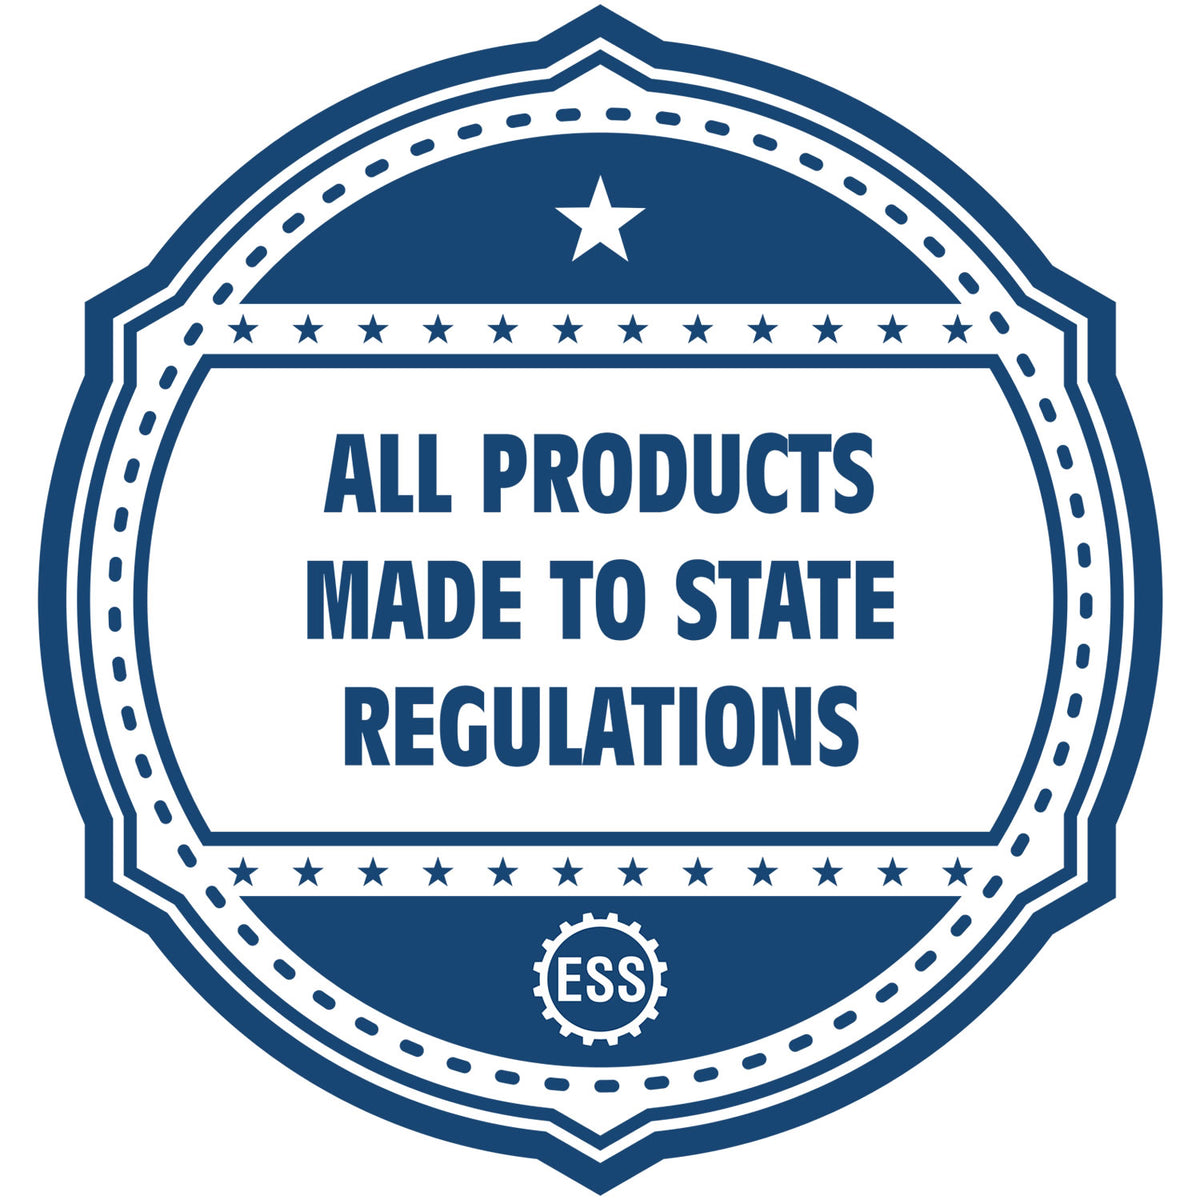 An icon or badge element for the Slim Pre-Inked State Seal Notary Stamp for Louisiana showing that this product is made in compliance with state regulations.